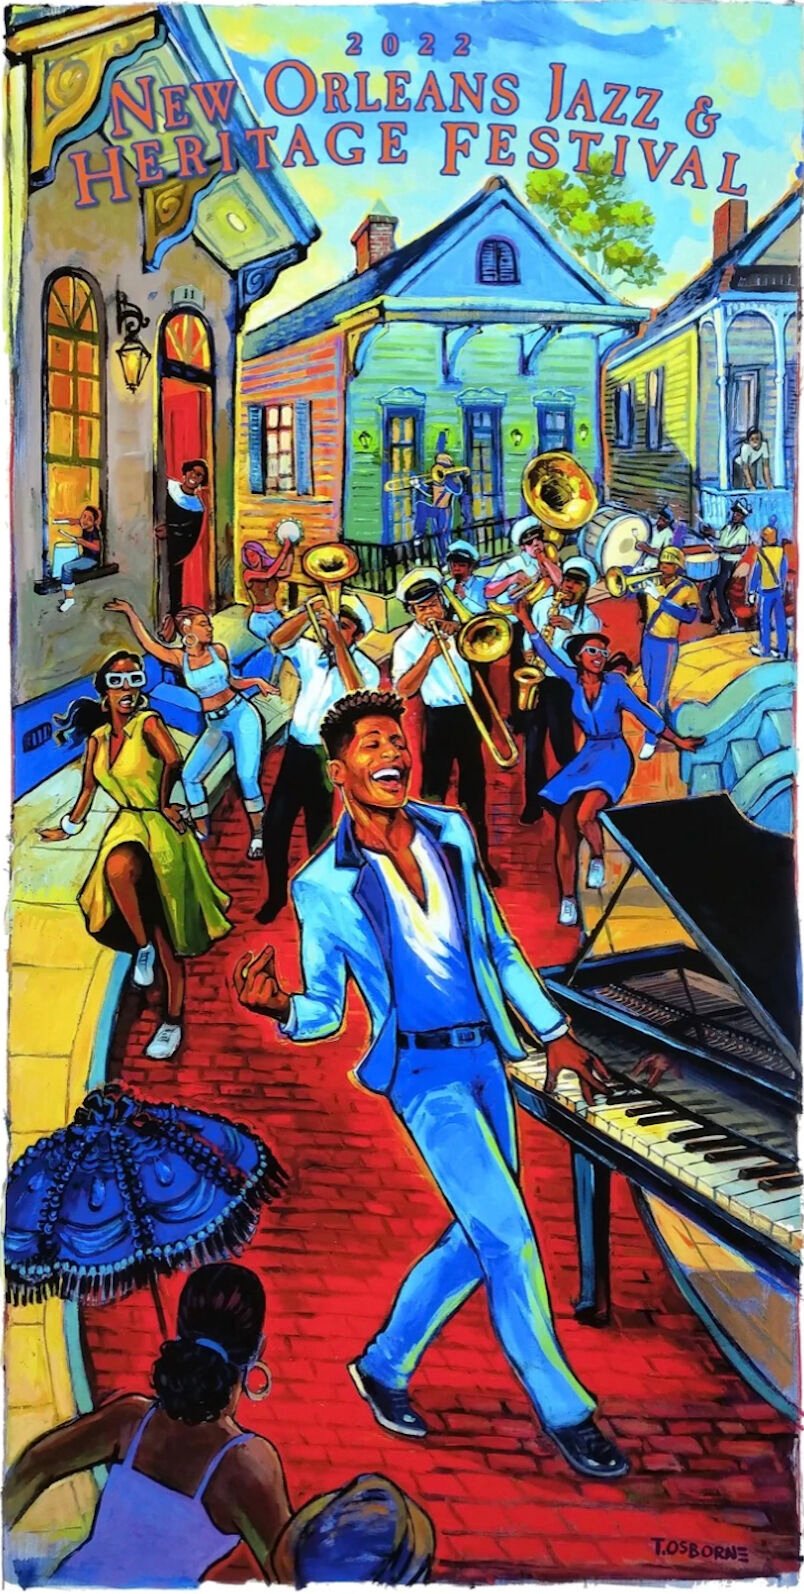 Jazz Fest 2022 Schedule Jon Batiste Is On The 2022 New Orleans Jazz Fest Poster But Not The Schedule.  Here's Why | Louisiana Festivals | Nola.com